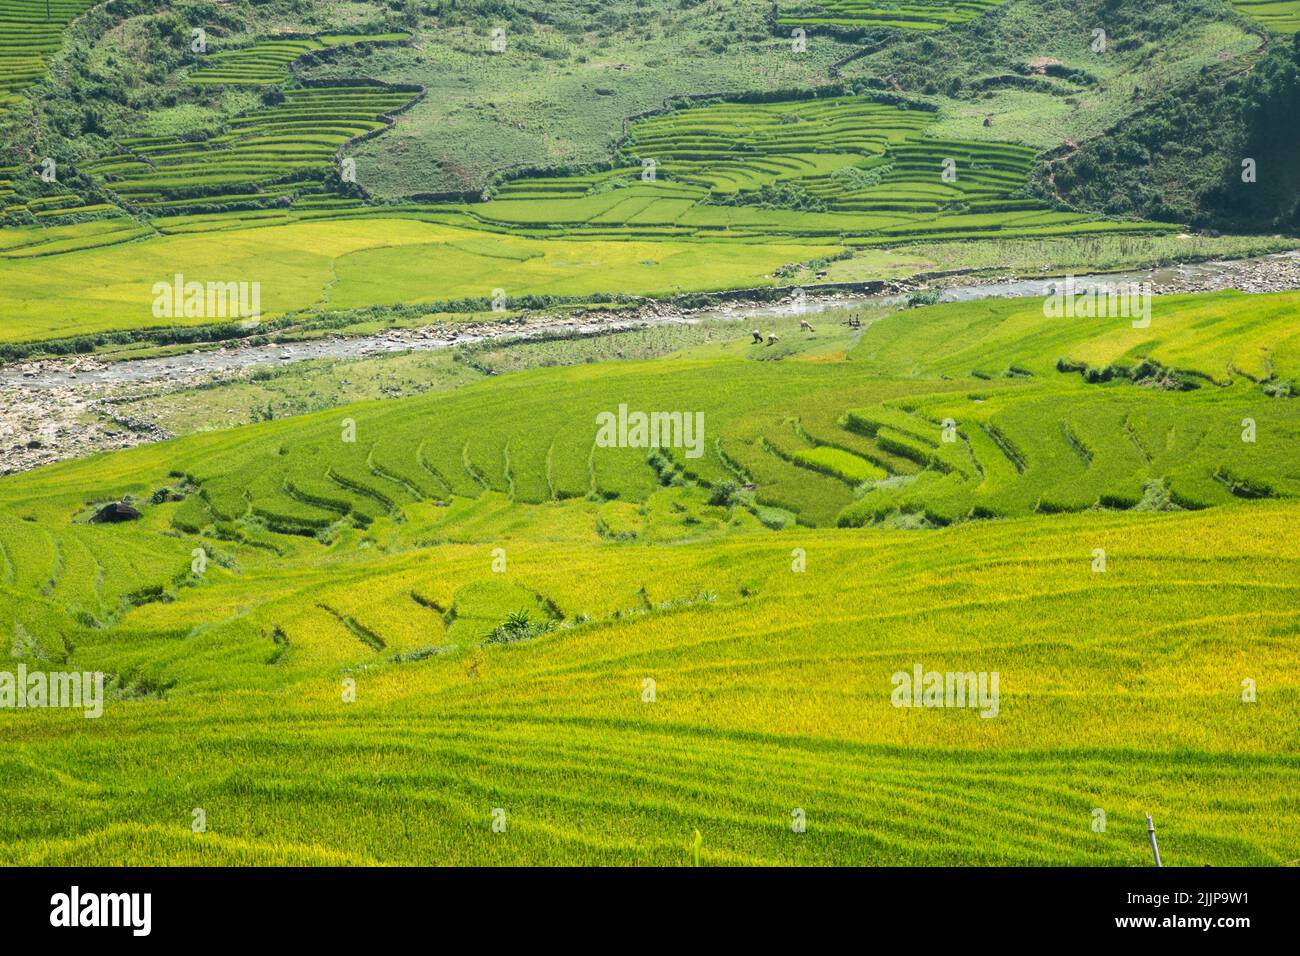 A beautiful view of rice fields in Sa pa, Vietnam Stock Photo